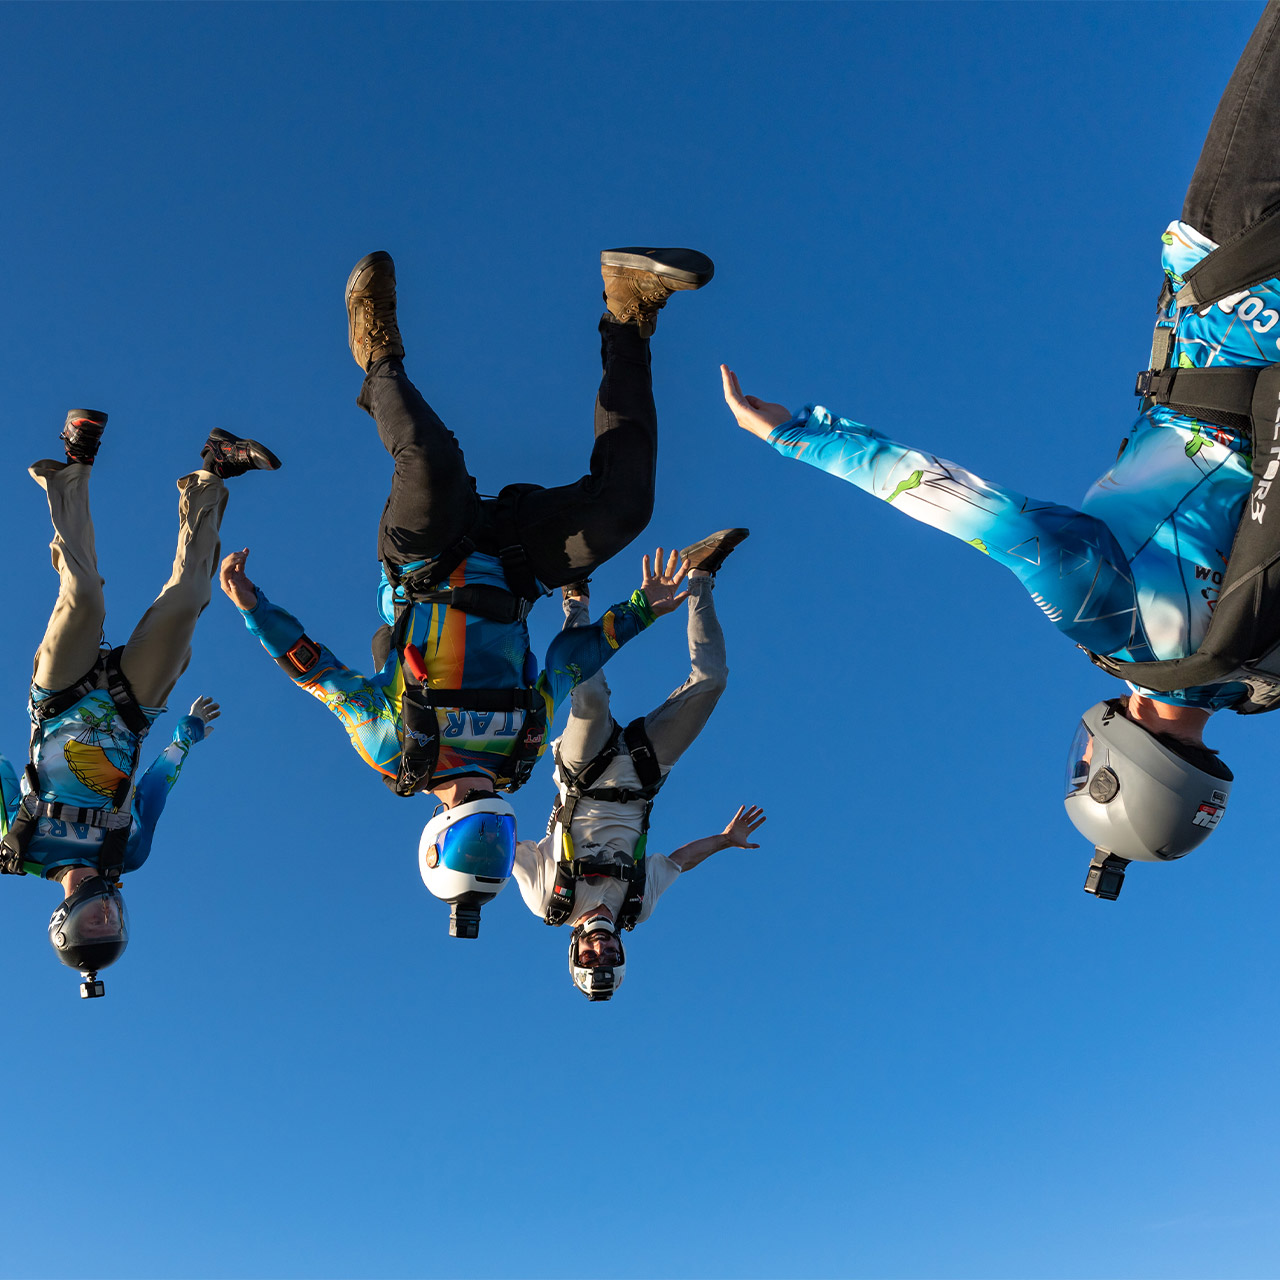 Four licensed skydivers in freefall flying a steep angle